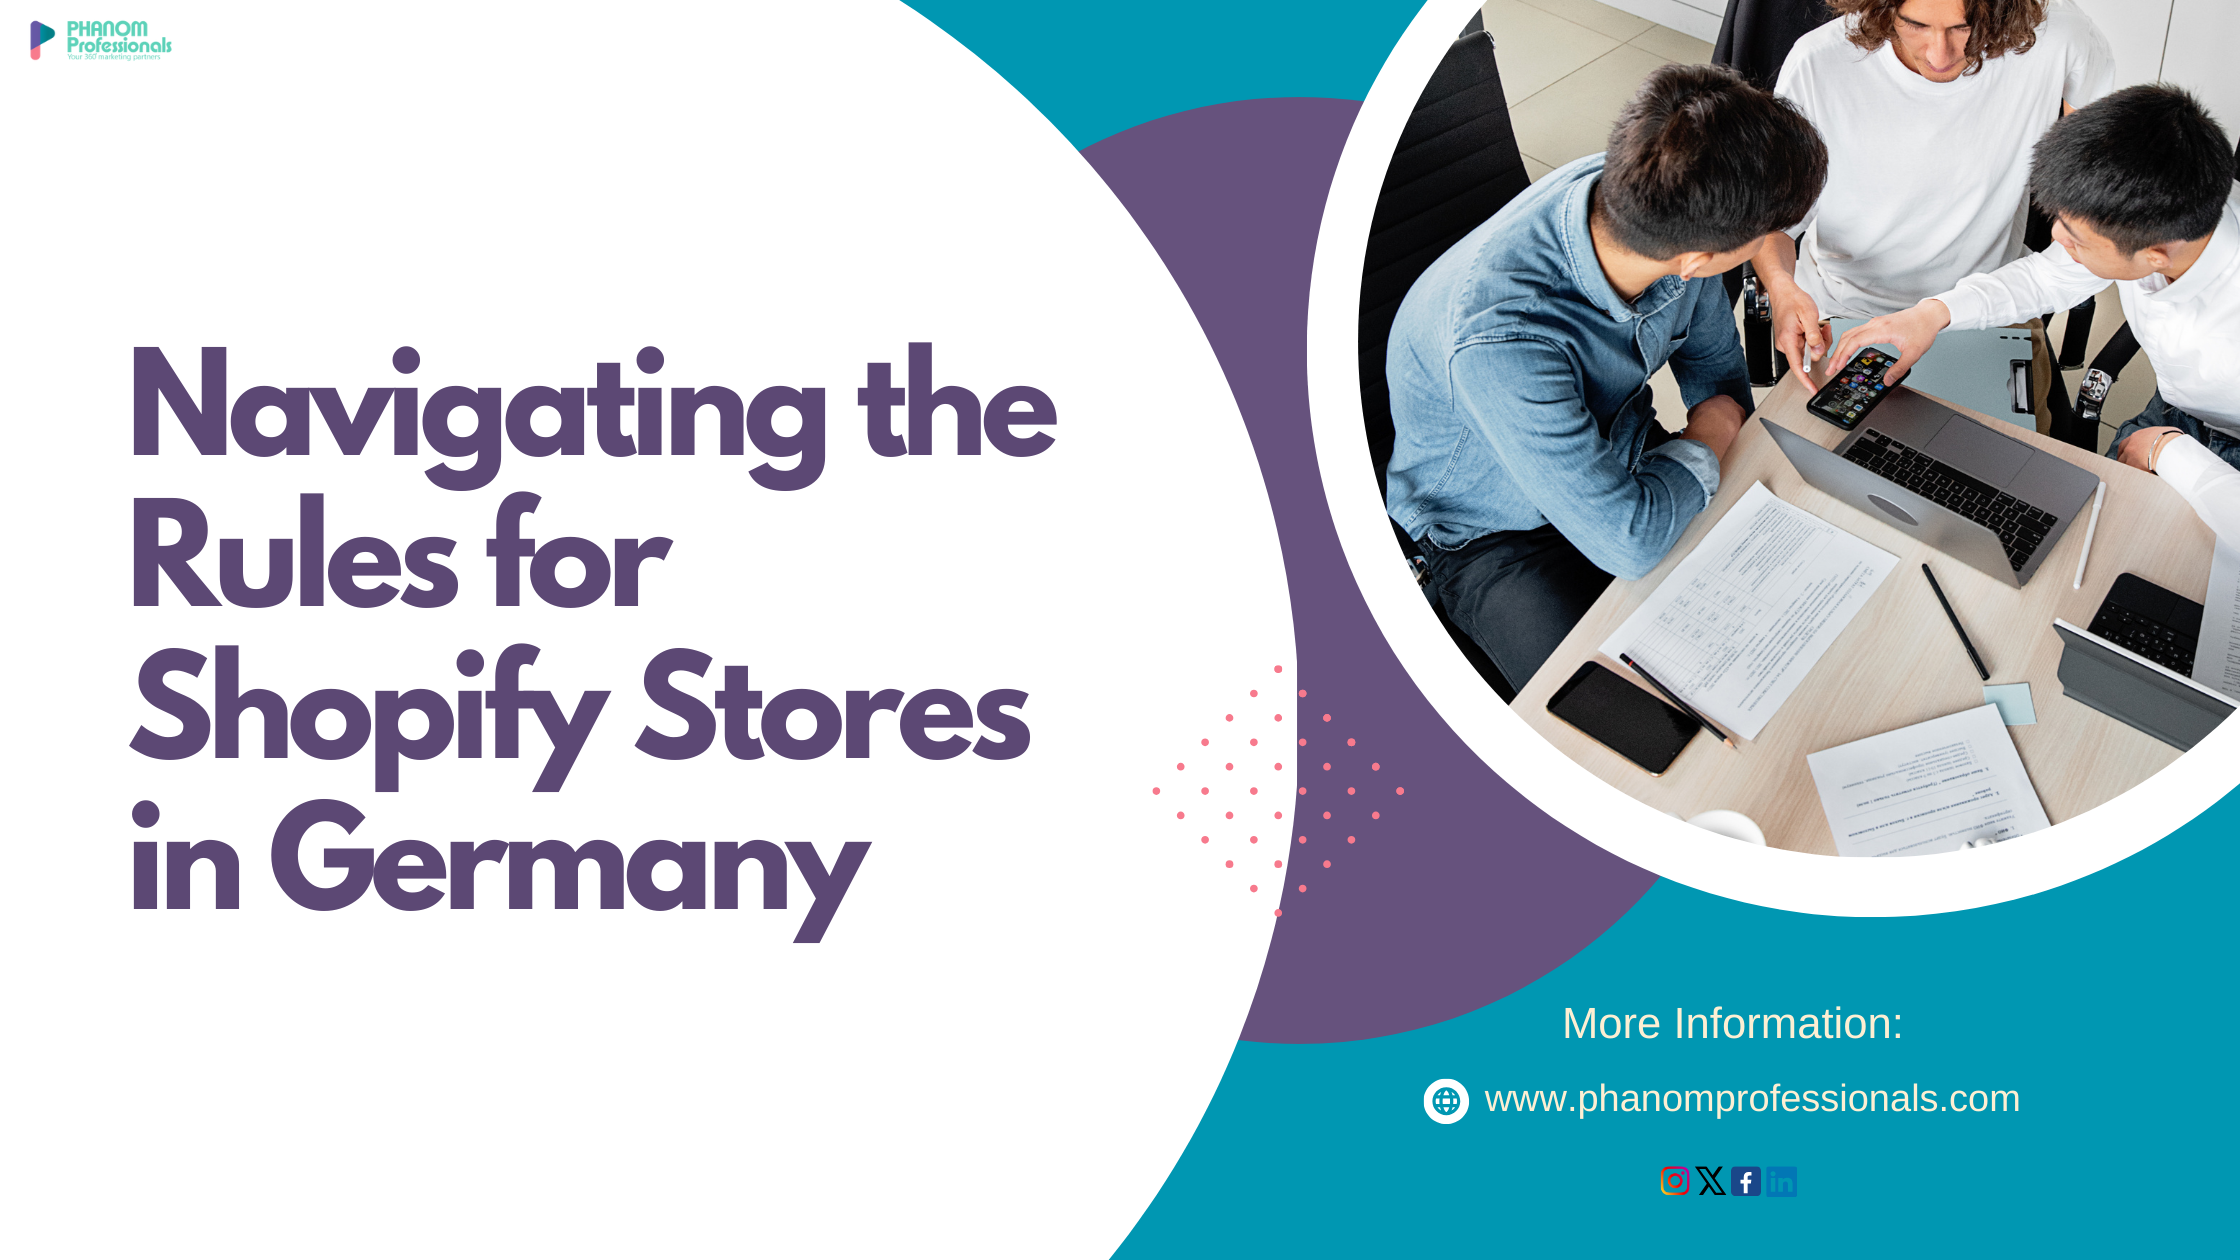 Rules for Shopify Stores in Germany